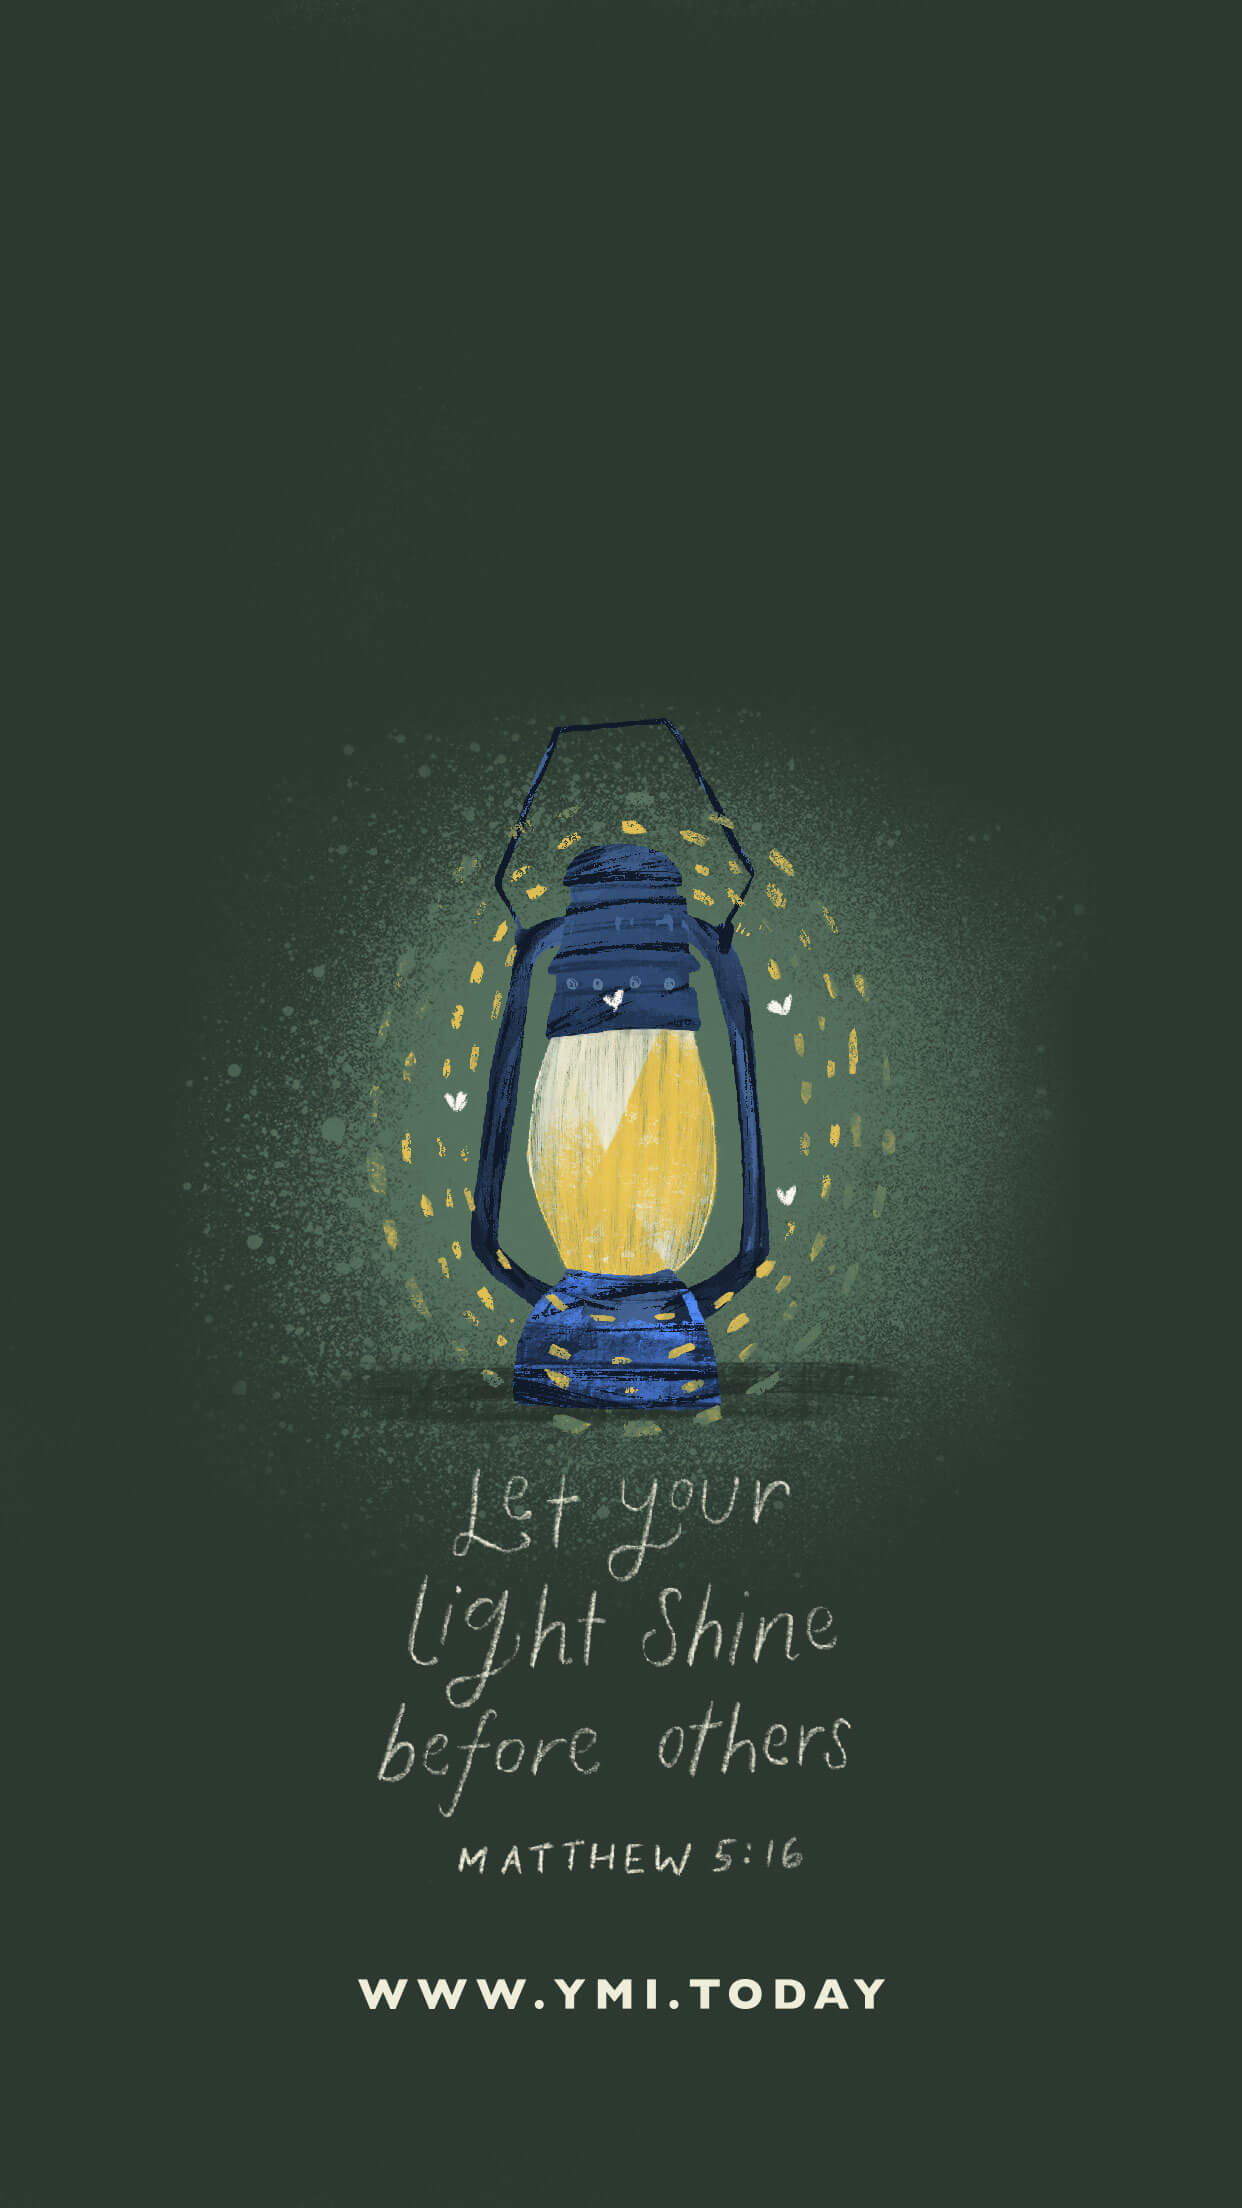 YMI August 2020 Phone Lockscreen - Let your light shine before others - Matthew 5:16